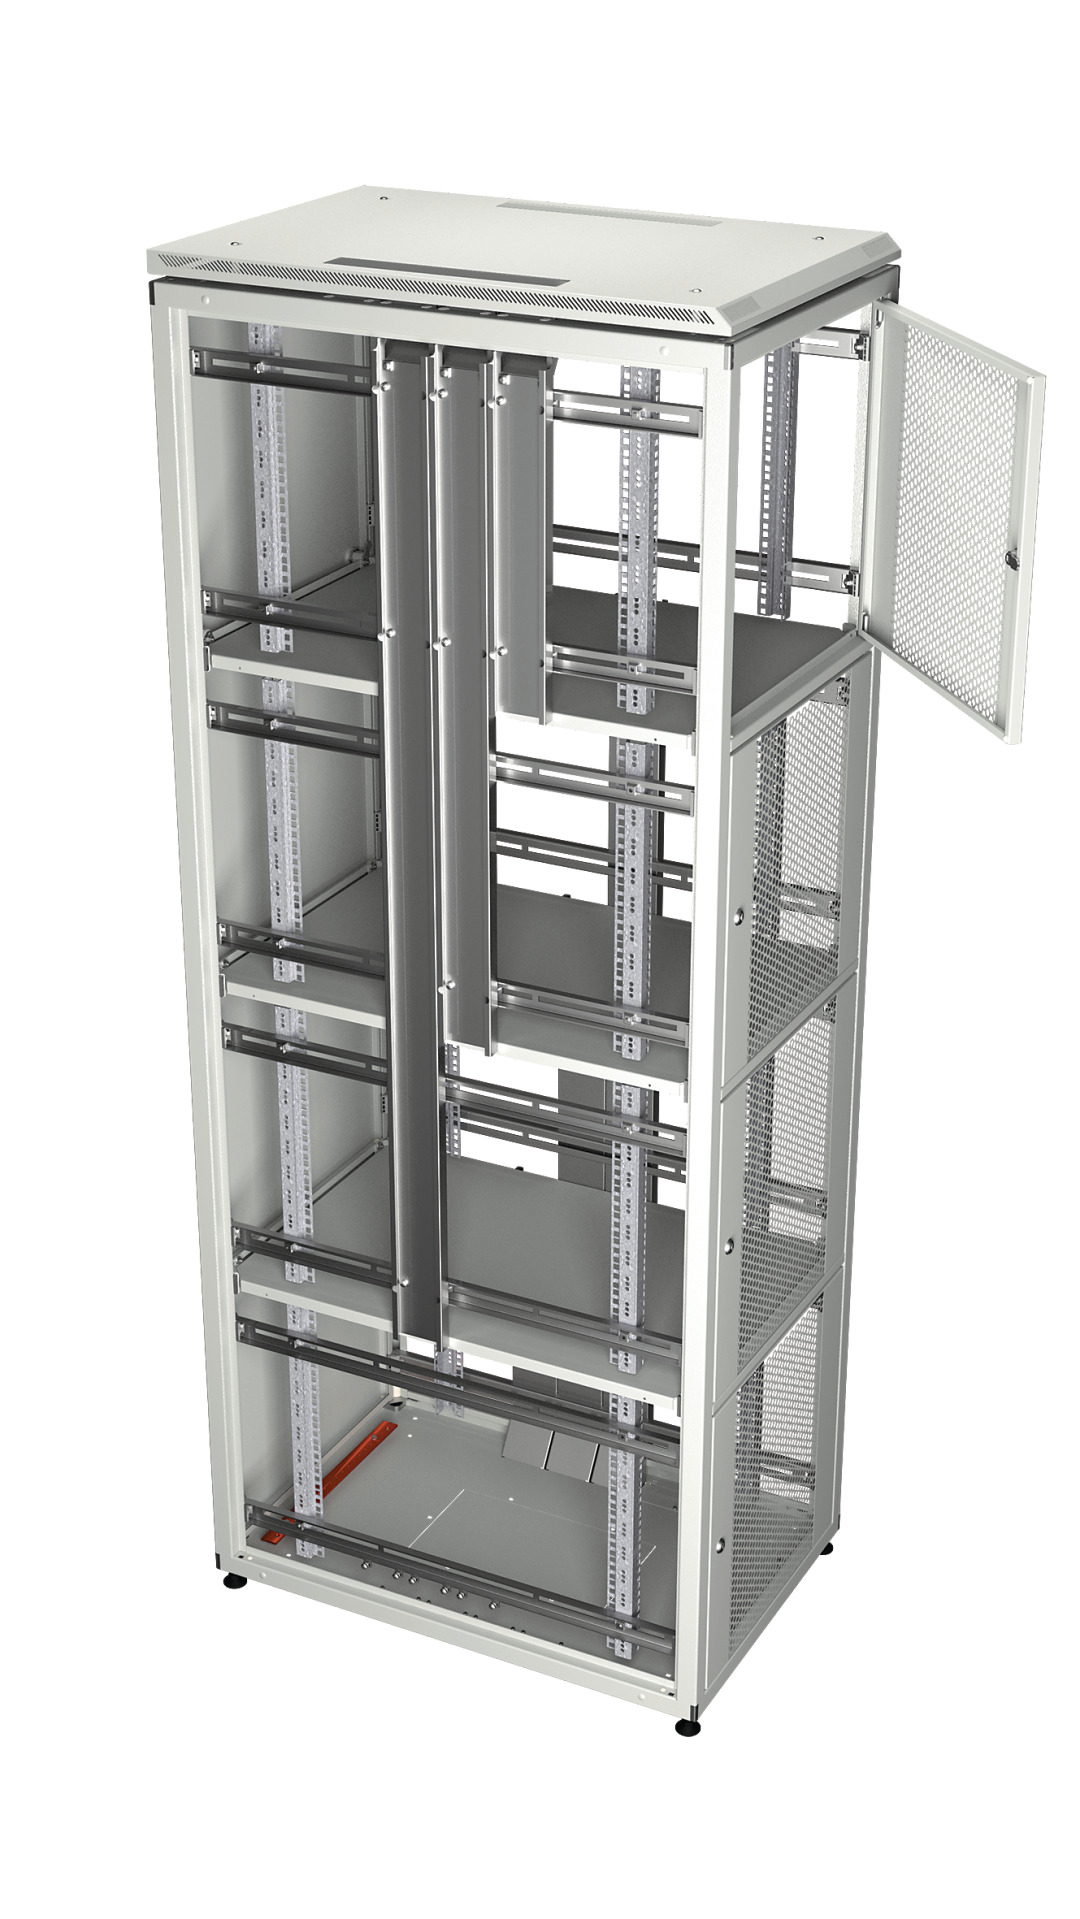 Co-Location Rack PRO, 4 x 10HE, 600x800 mm, F+R 1-tlg. perforiert, RAL9005